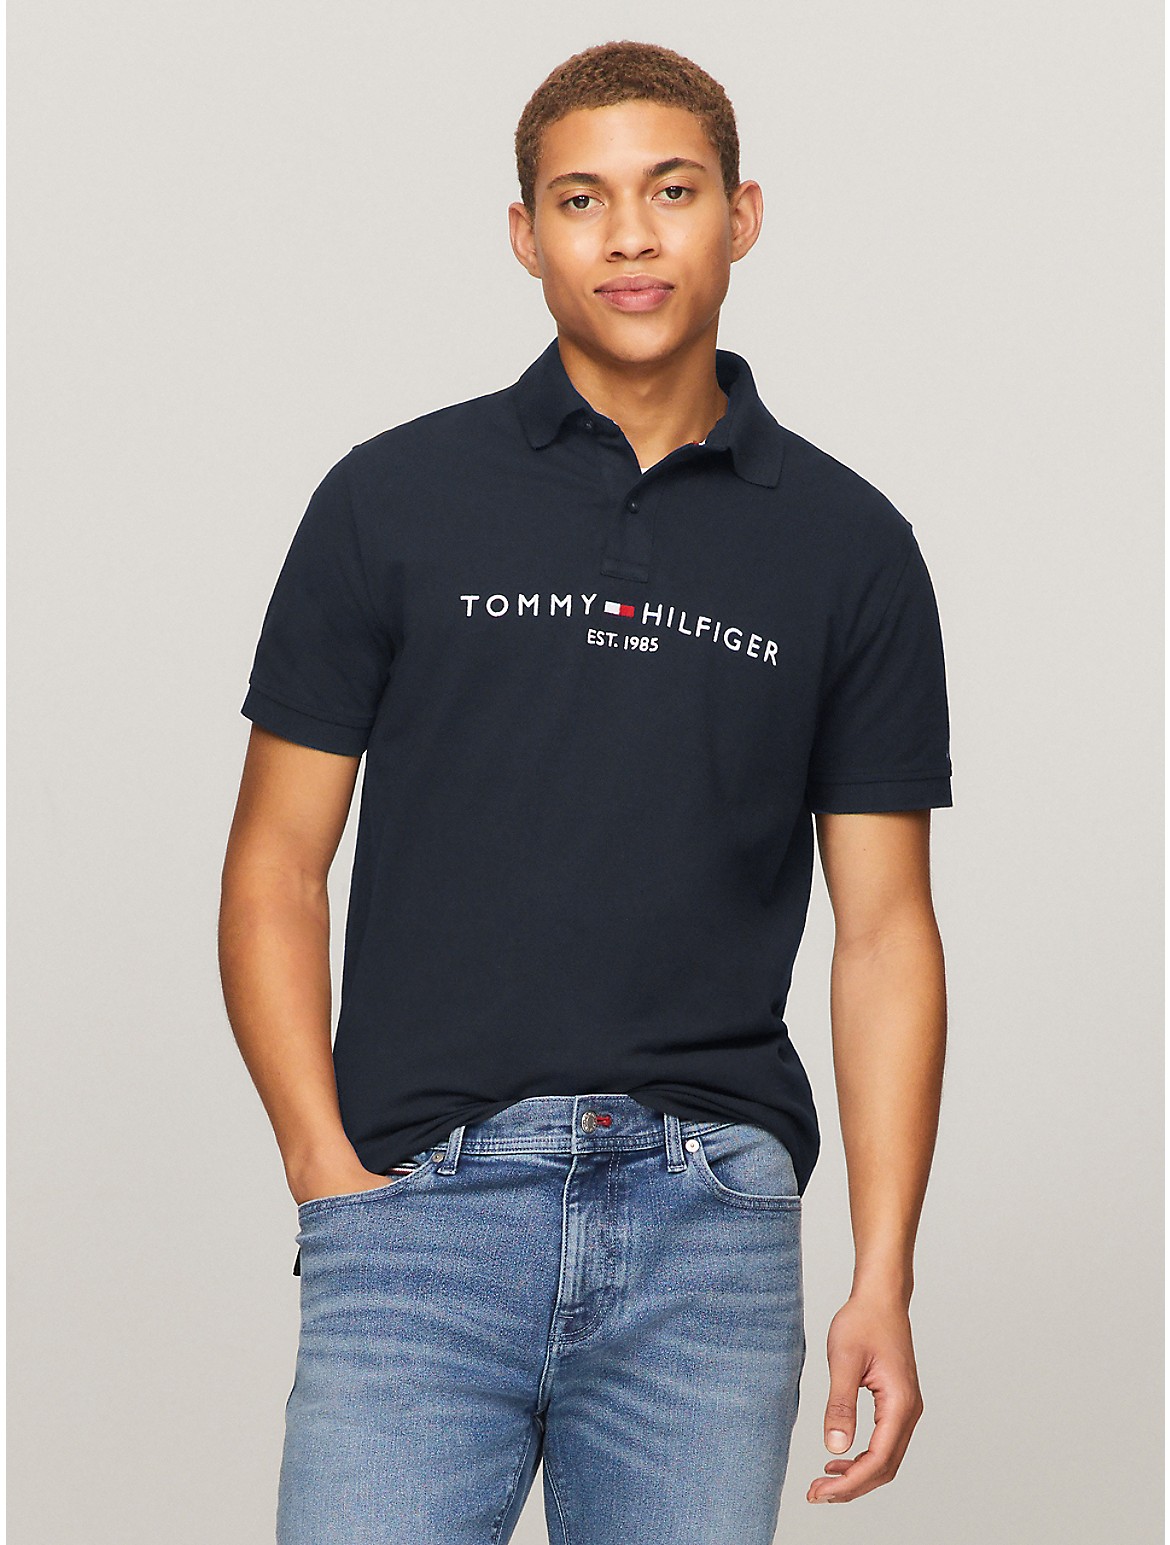 Tommy Hilfiger Men's Regular Fit Embroidered Tommy Graphic Polo - Blue - XS